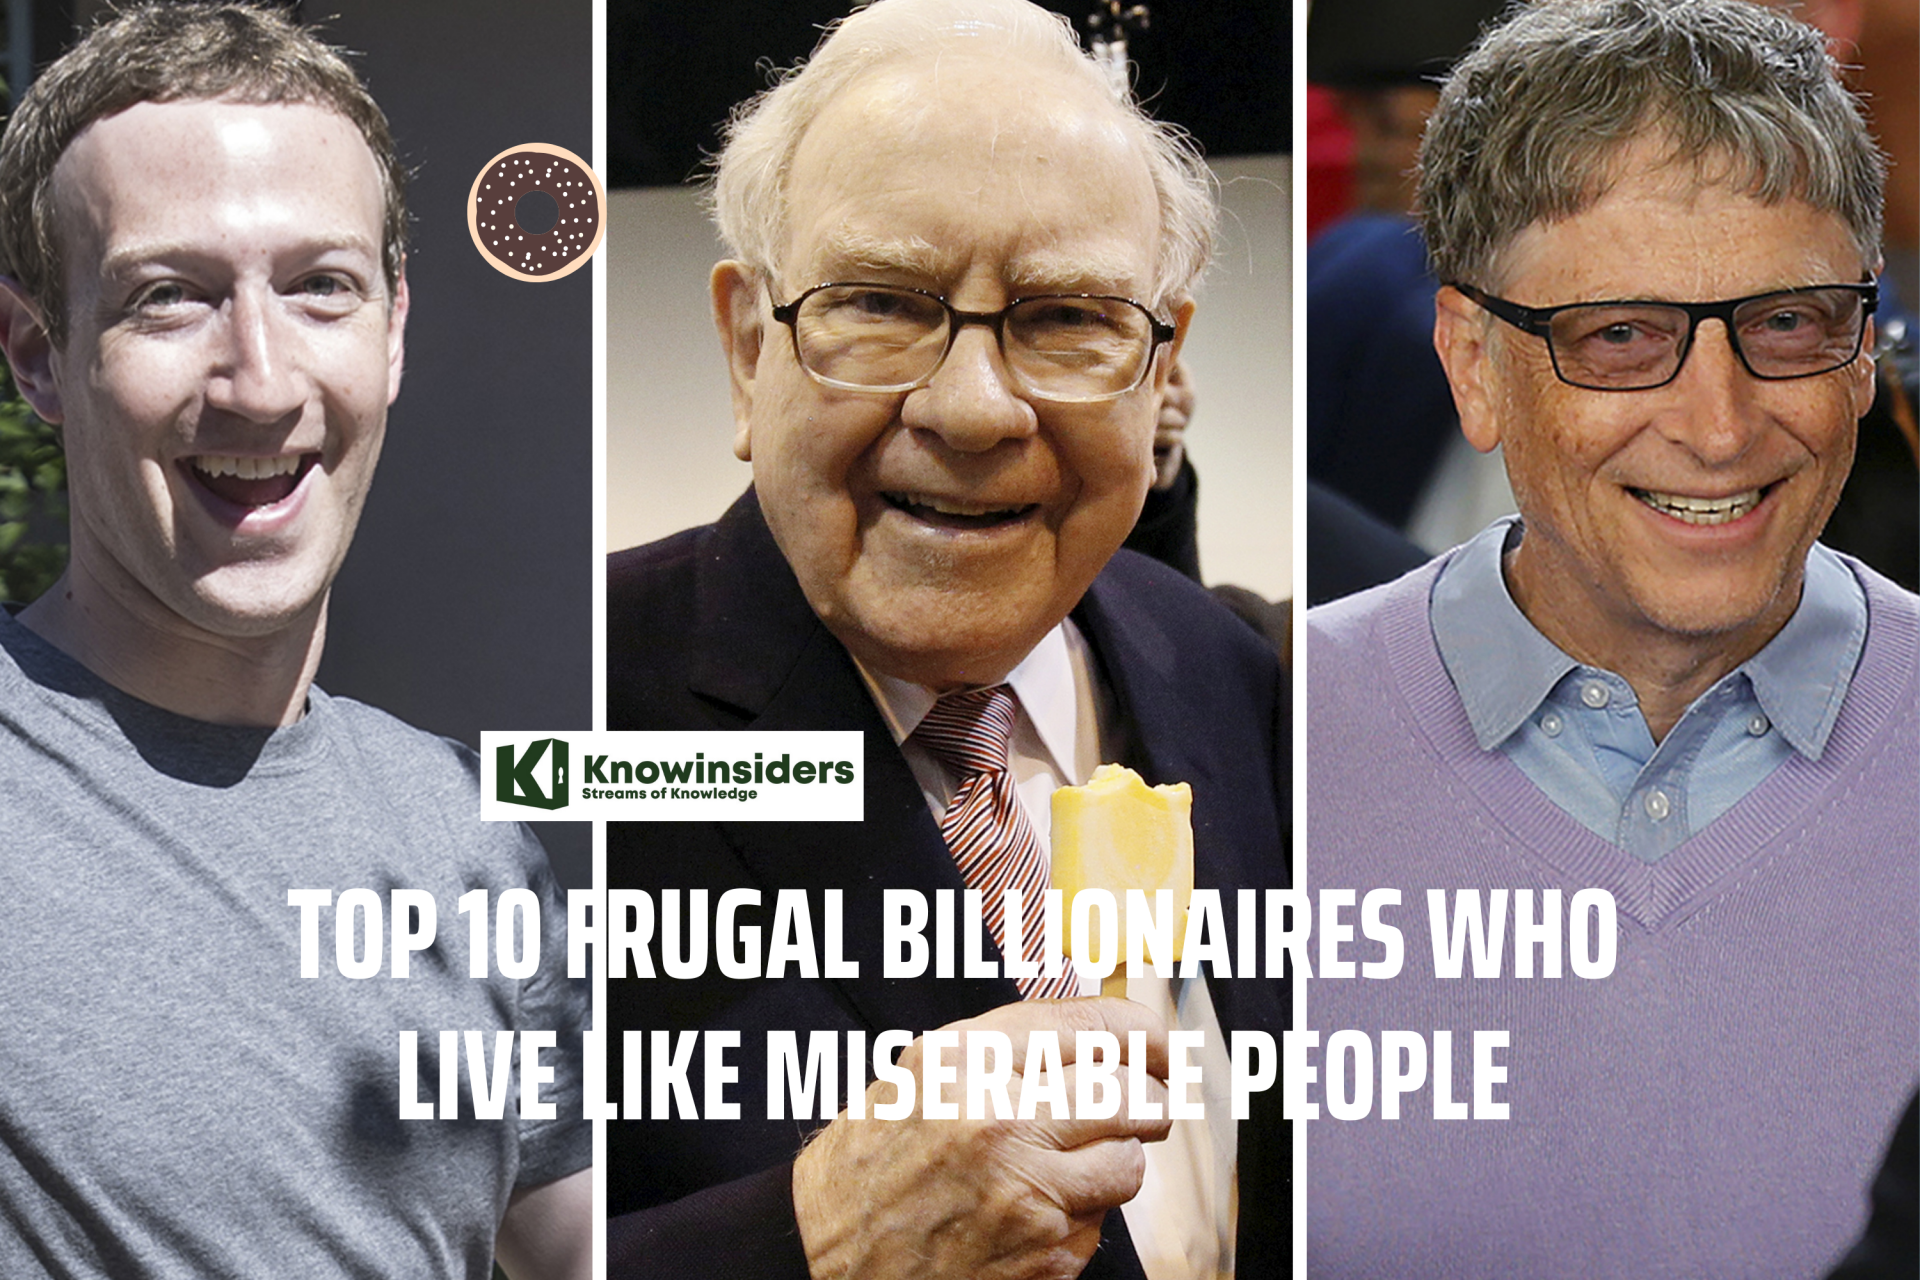 Top 10 Frugal Billionaires Who Live Like Miserable People